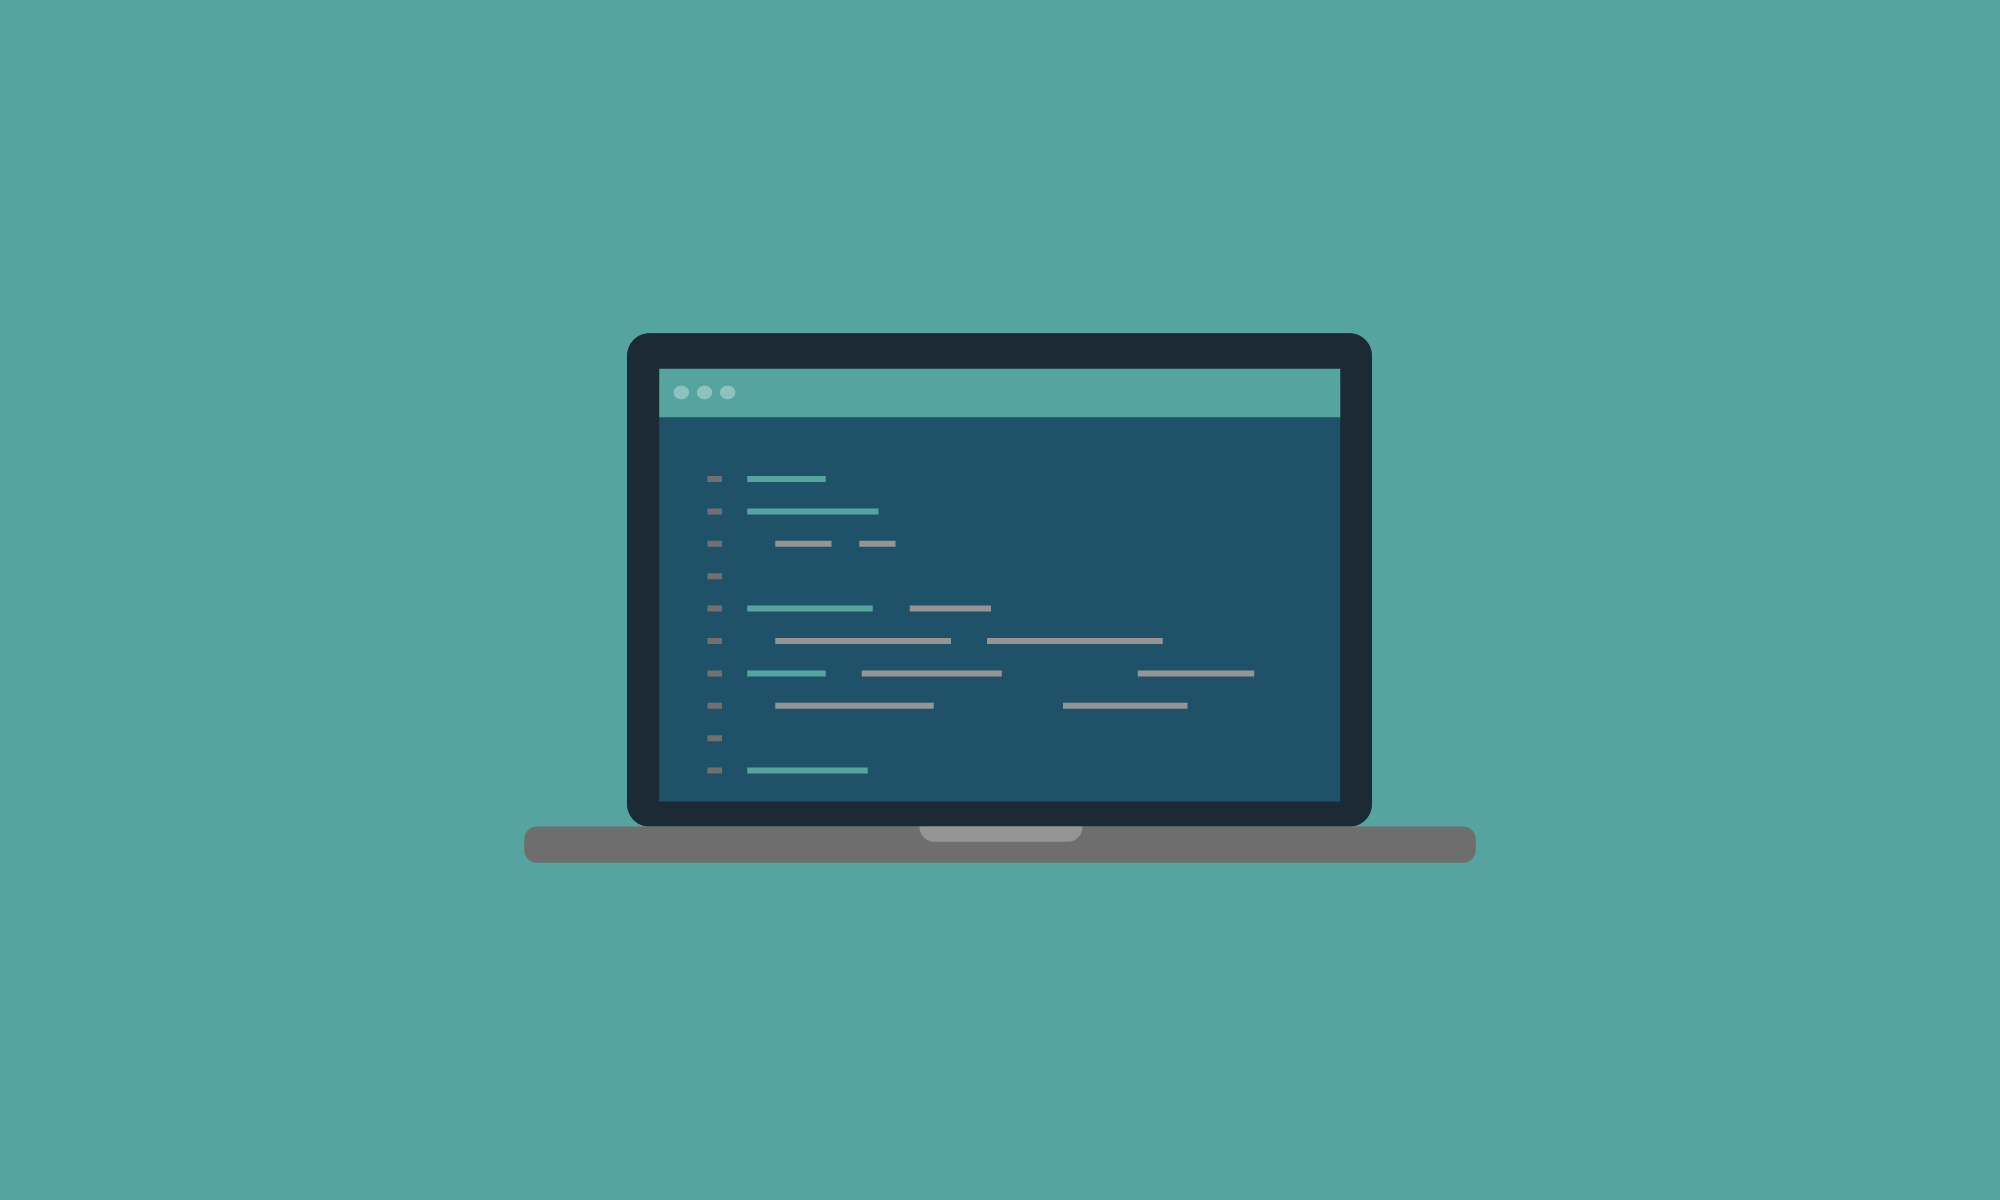 How to become a better web developer